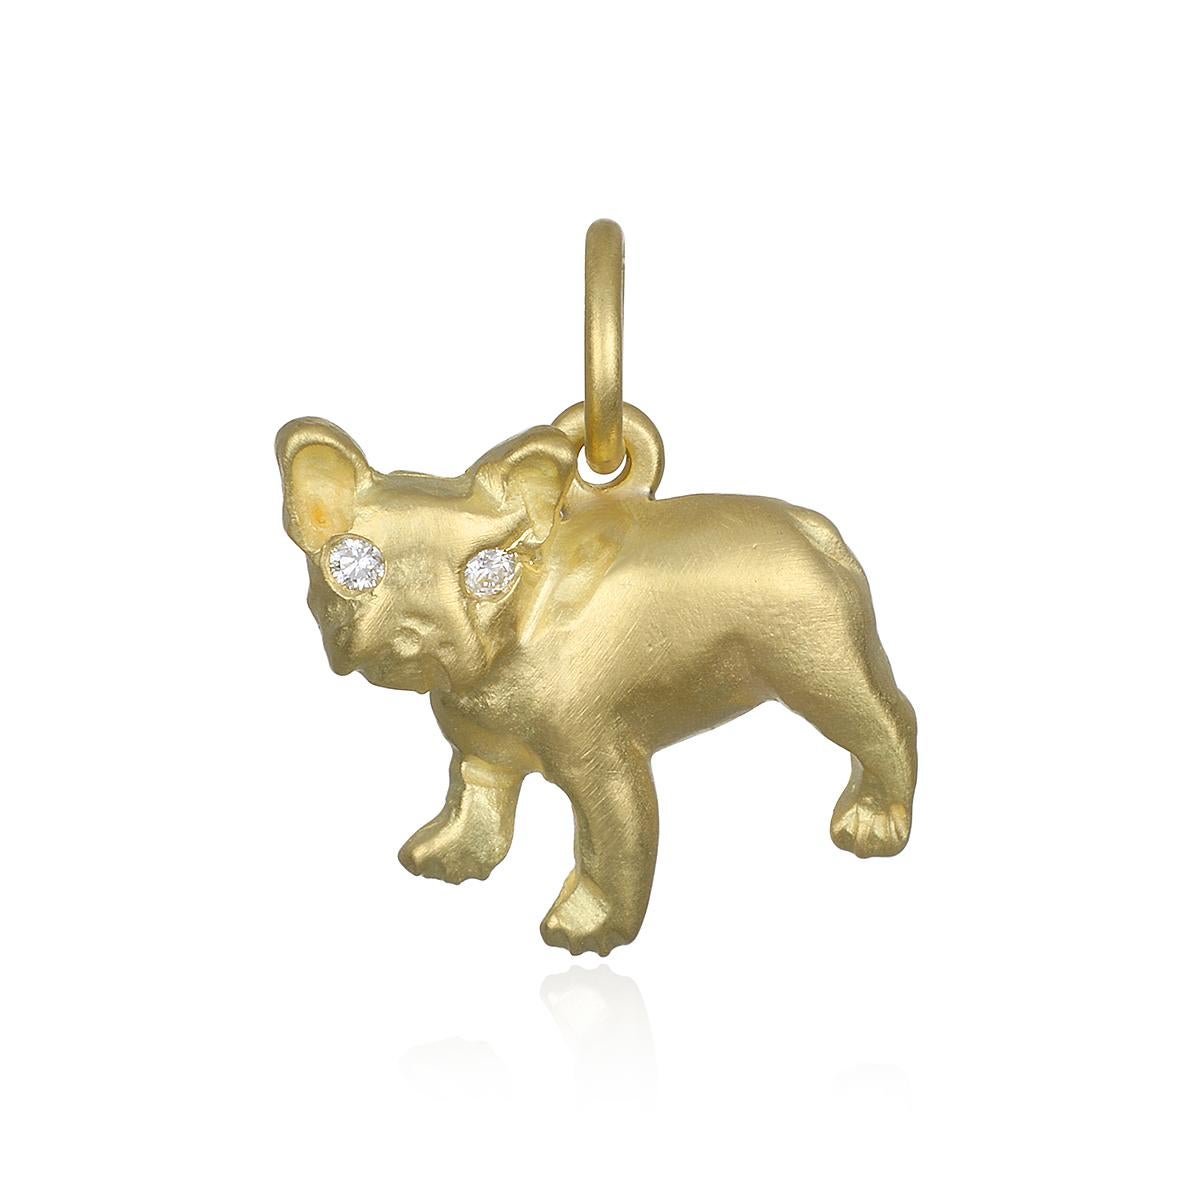 For the Frenchie lover, this Faye Kim 18 Karat Gold French Bulldog Charm is full of personality and complete with diamond eyes. The cable chain is 16-18